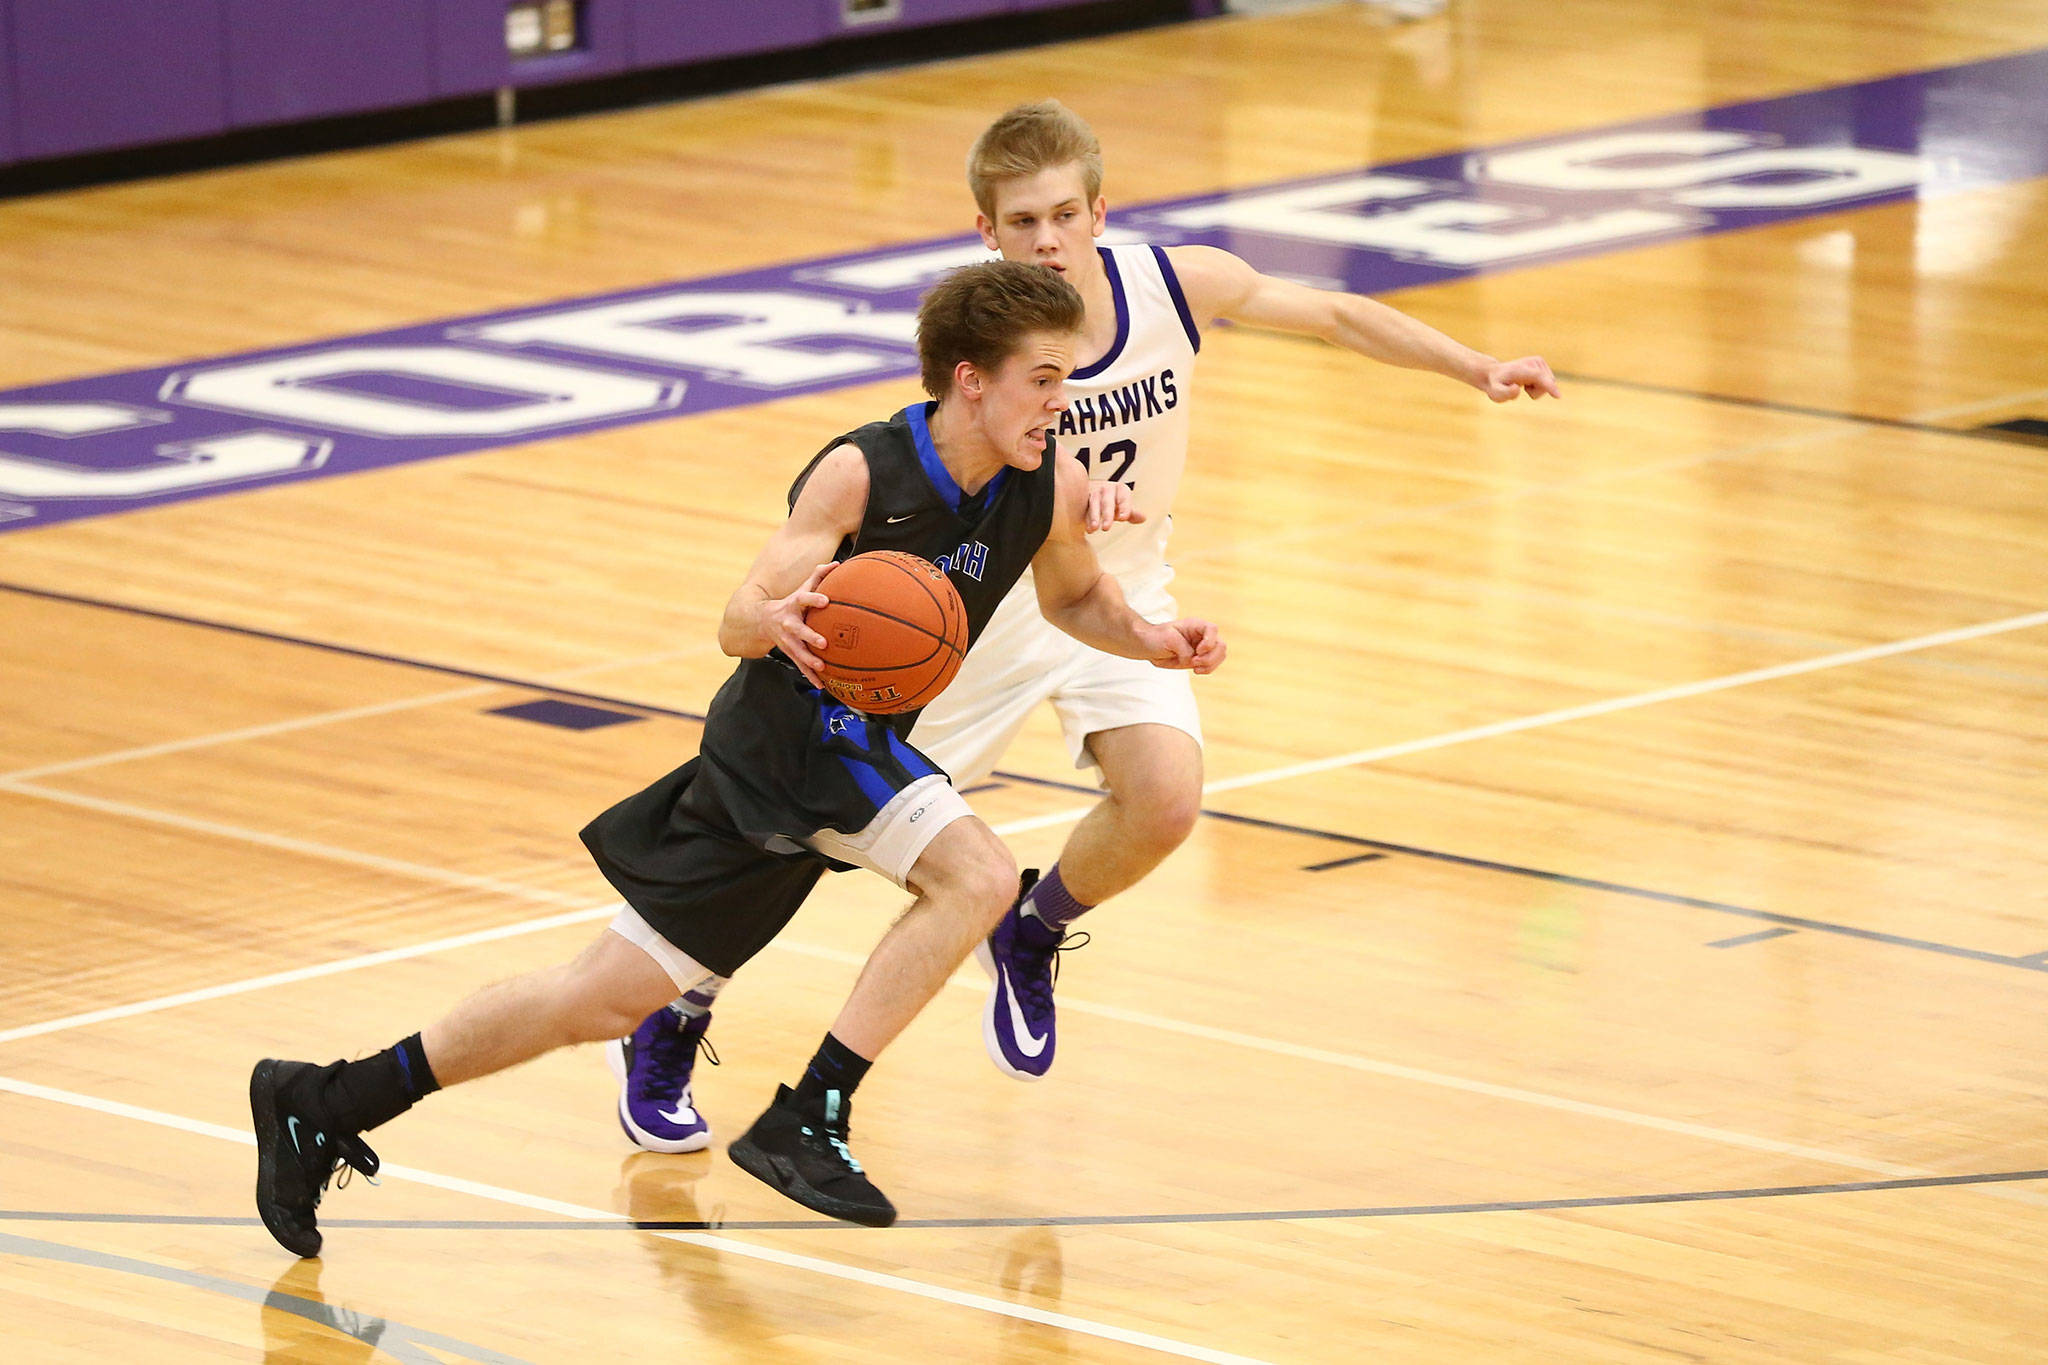 South Whidbey’s Nick Young dribbles through Anacortes’ defense. (Photo by John Fisken)